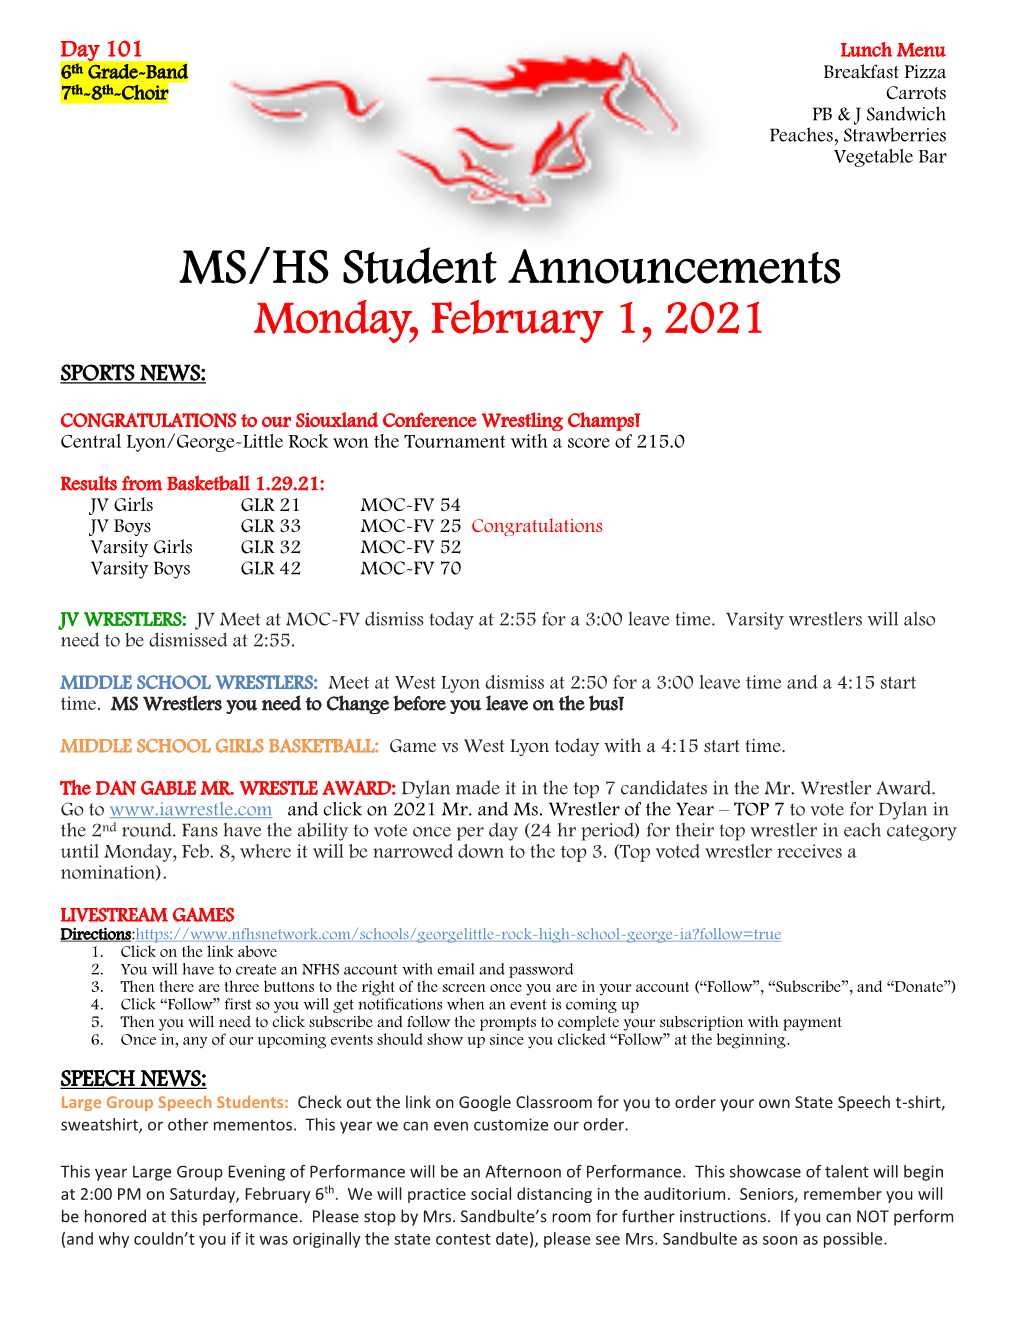 MS/HS Student Announcements Monday, February 1, 2021